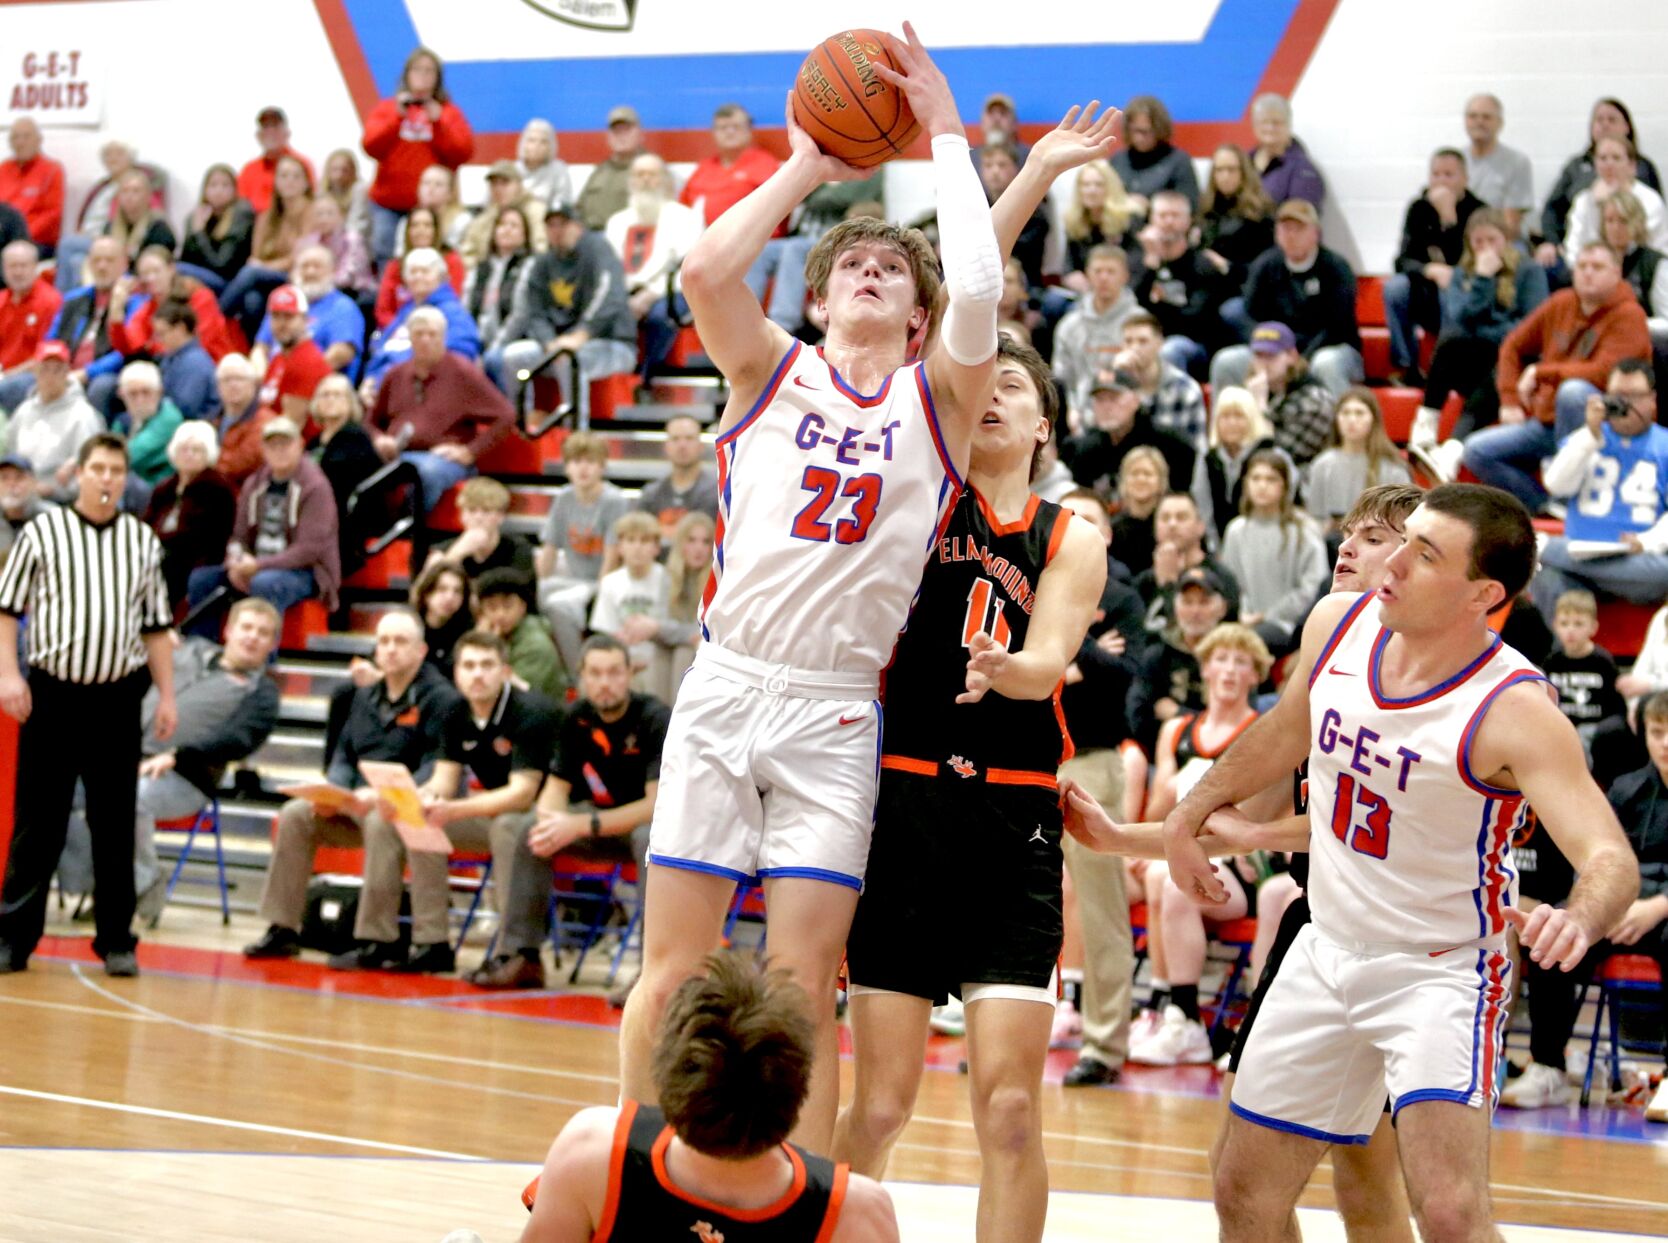 Local sports roundup: Gale-Ettrick-Trempealeau boys hoops loses for first time in overtime